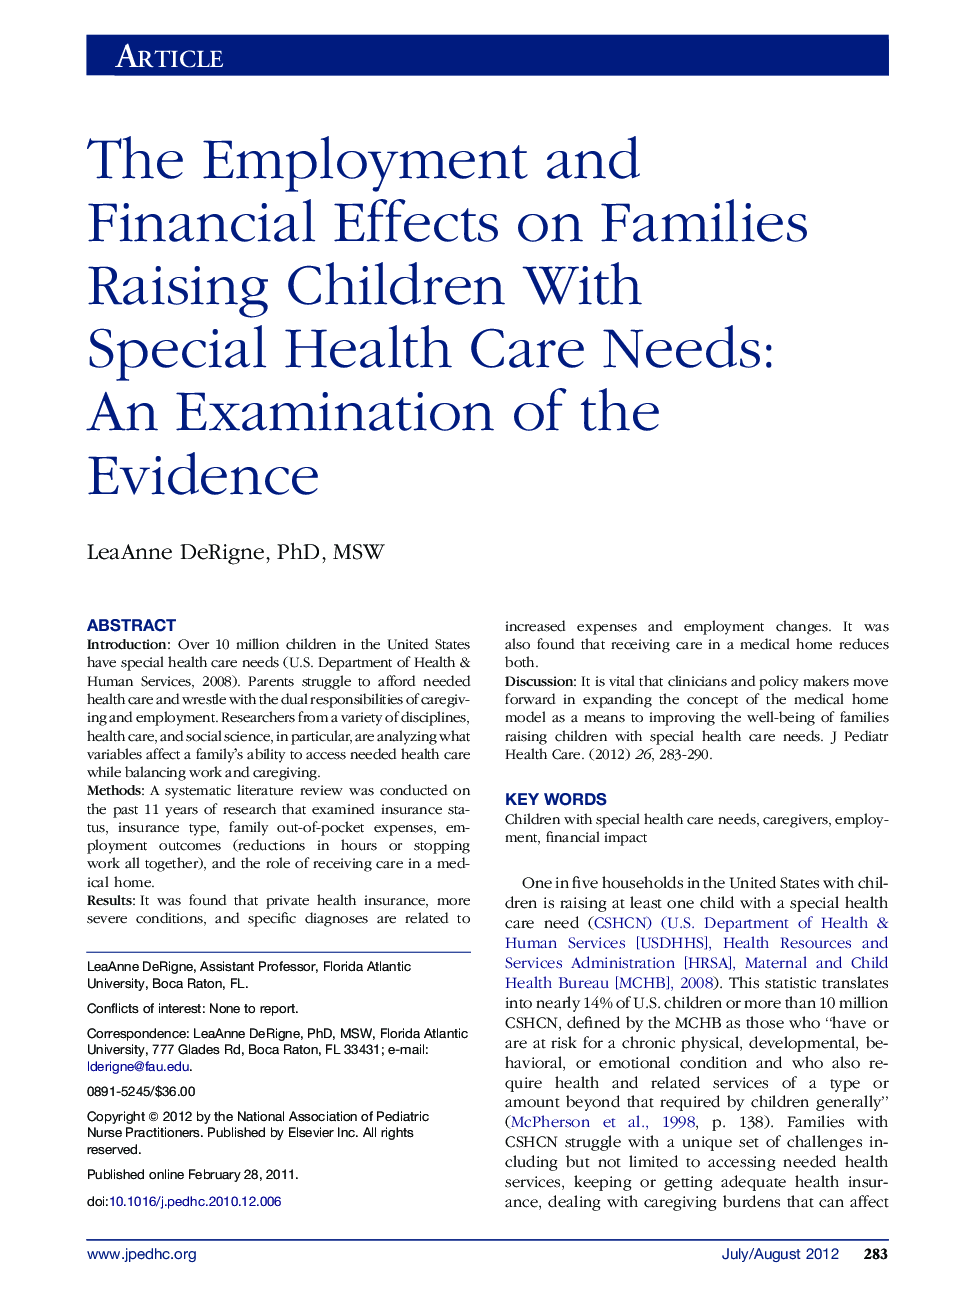 The Employment and Financial Effects on Families Raising Children With Special Health Care Needs: An Examination of the Evidence 